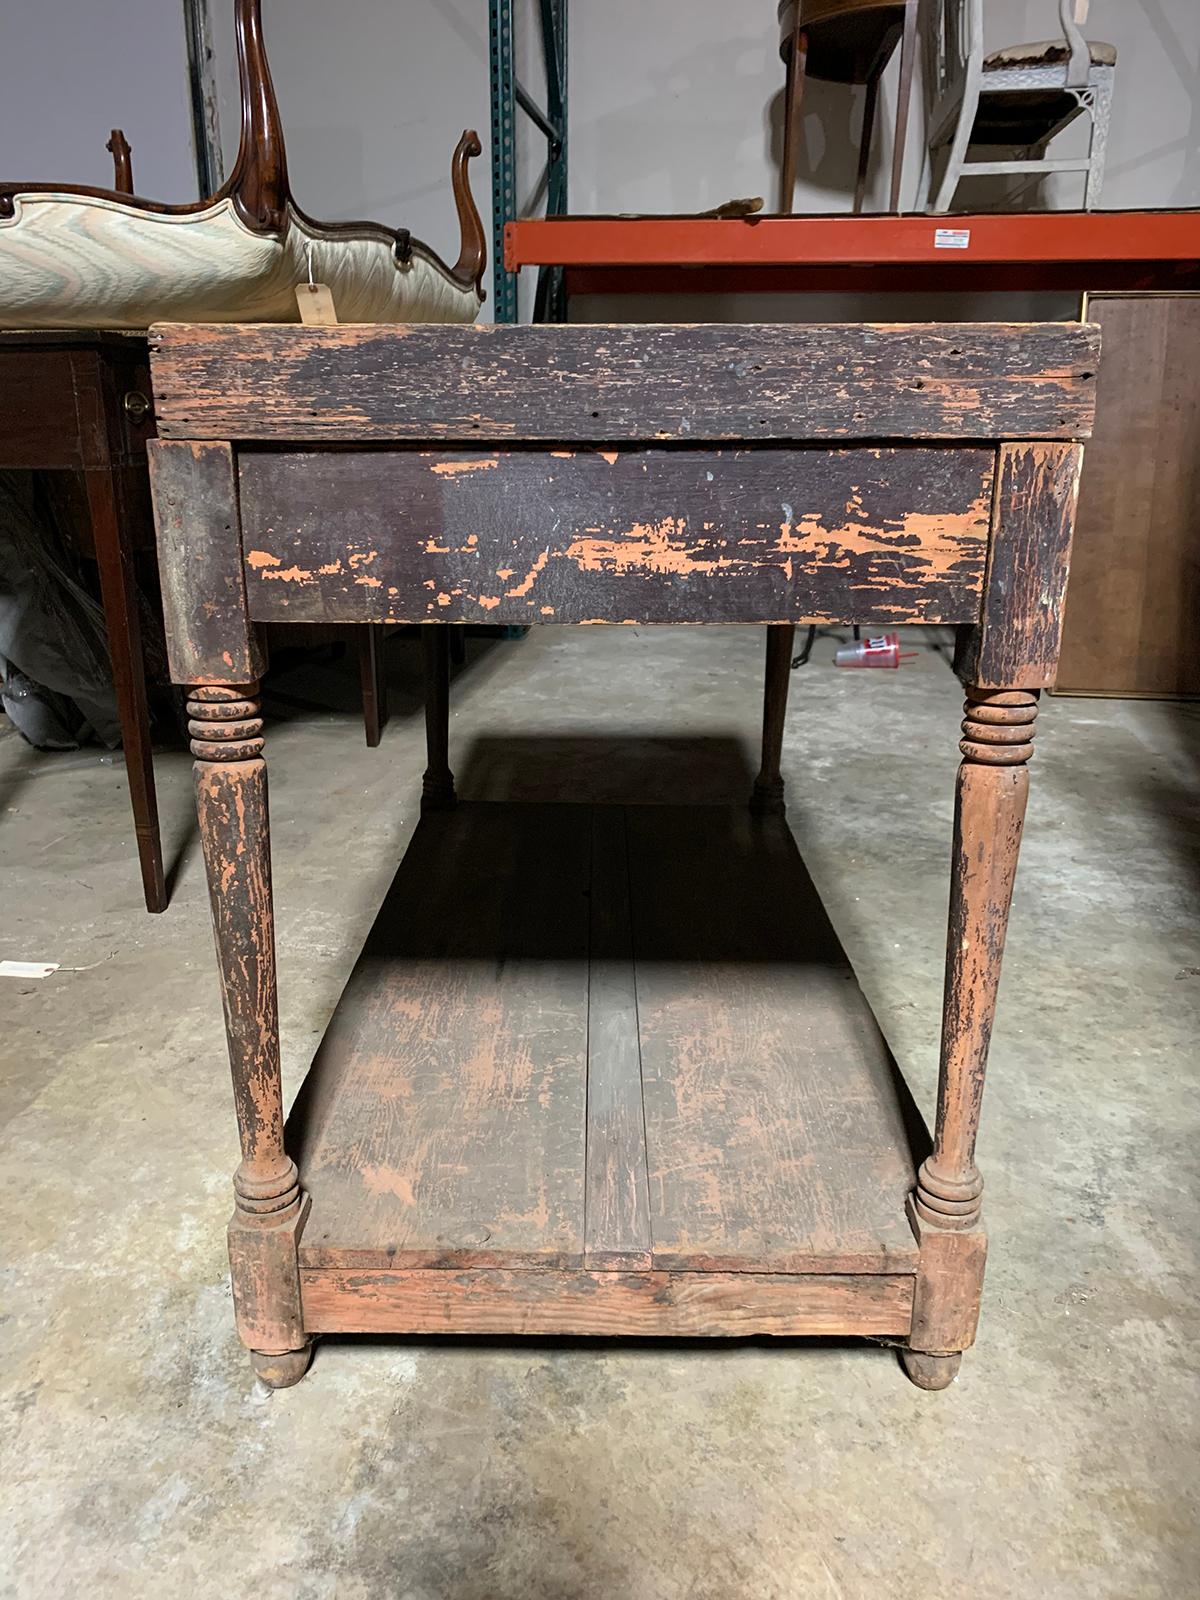 19th-Early 20th Century Primitive American Painted Work Table, Original Finish 11